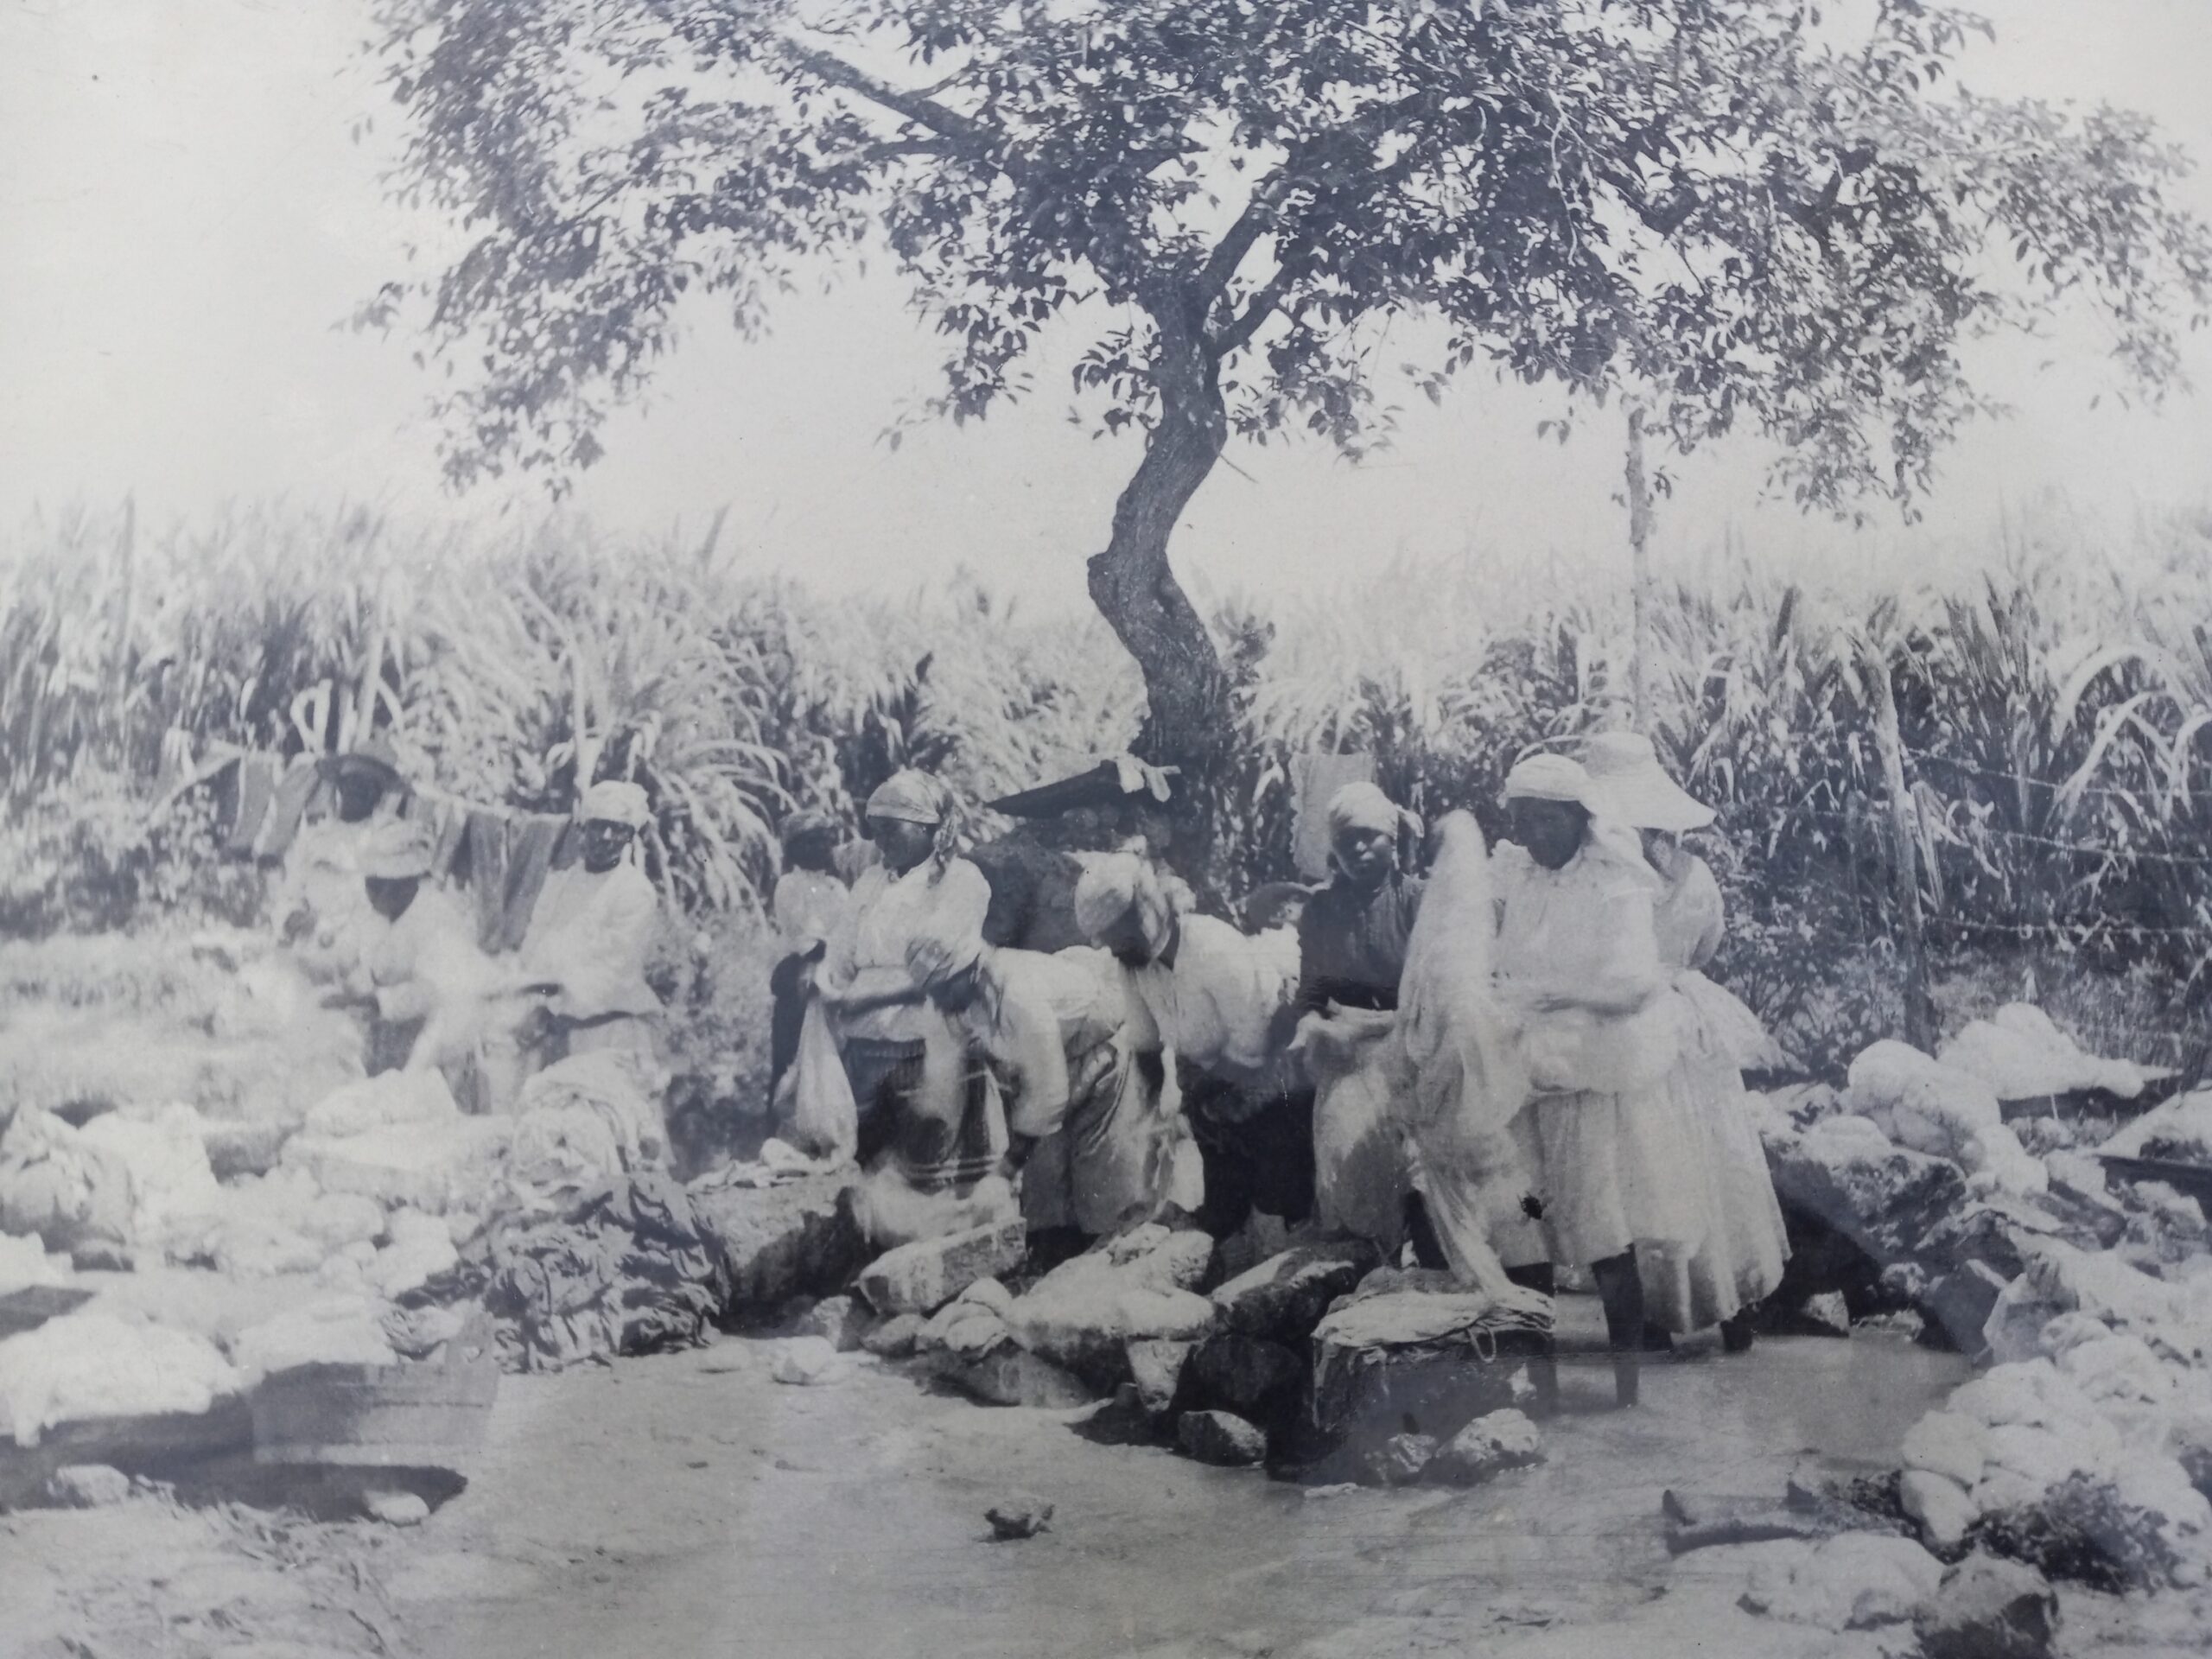 Harden Gut, just outside of Frederiksted town, was a popular stream where women washed their clothes. (Photo courtesy Olasee Davis)